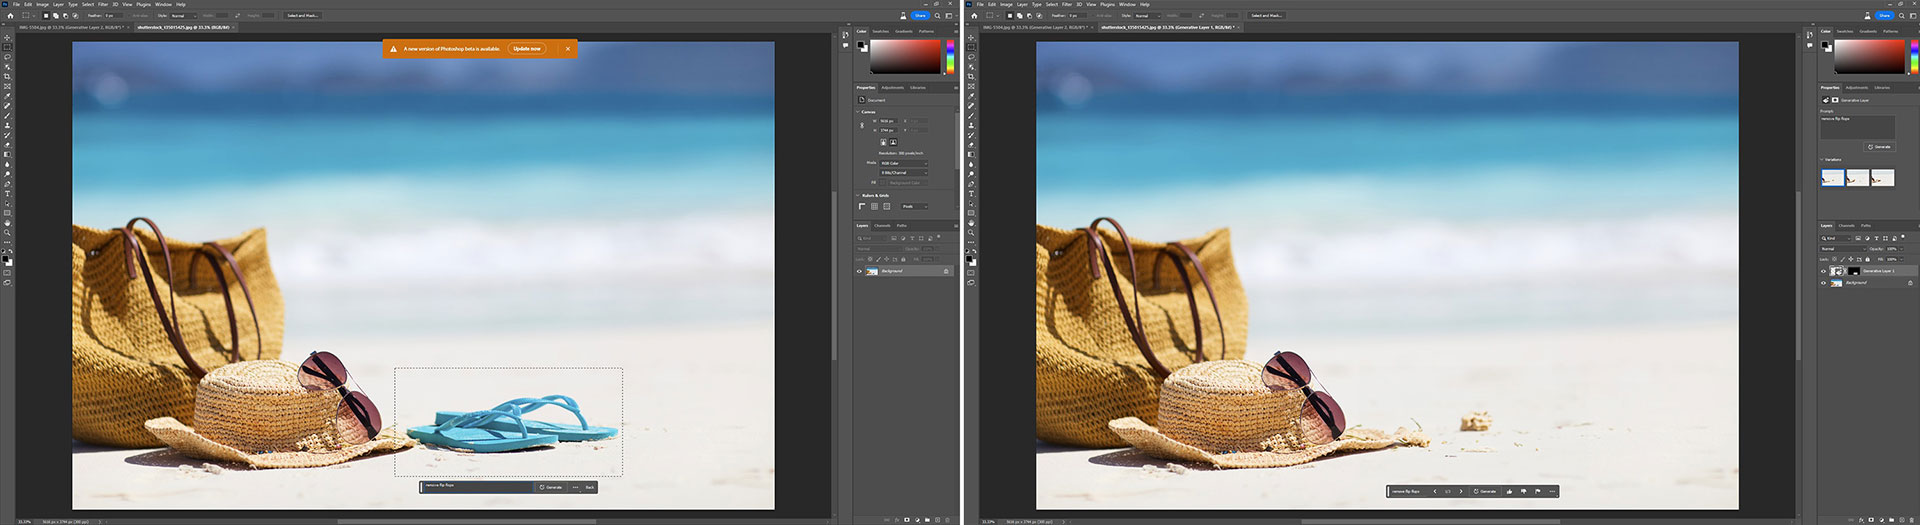 Two side-by-side images in Photoshop of items on a sandy beach showing the before and after of using Generative Fill to remove the flipflops from the image.